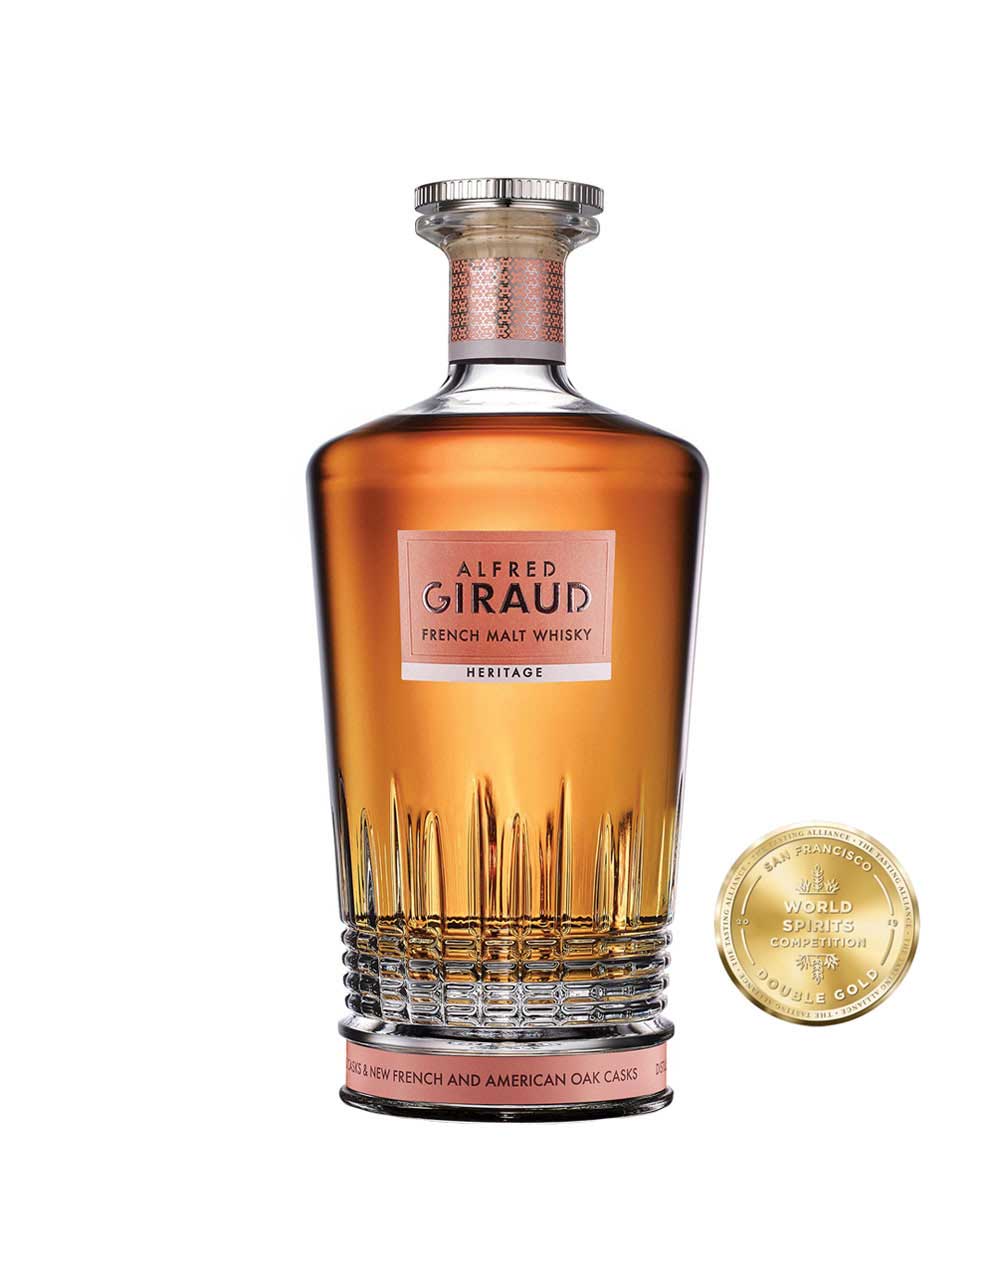 ALFRED GIRAUD HERITAGE FRENCH MALT WHISKY